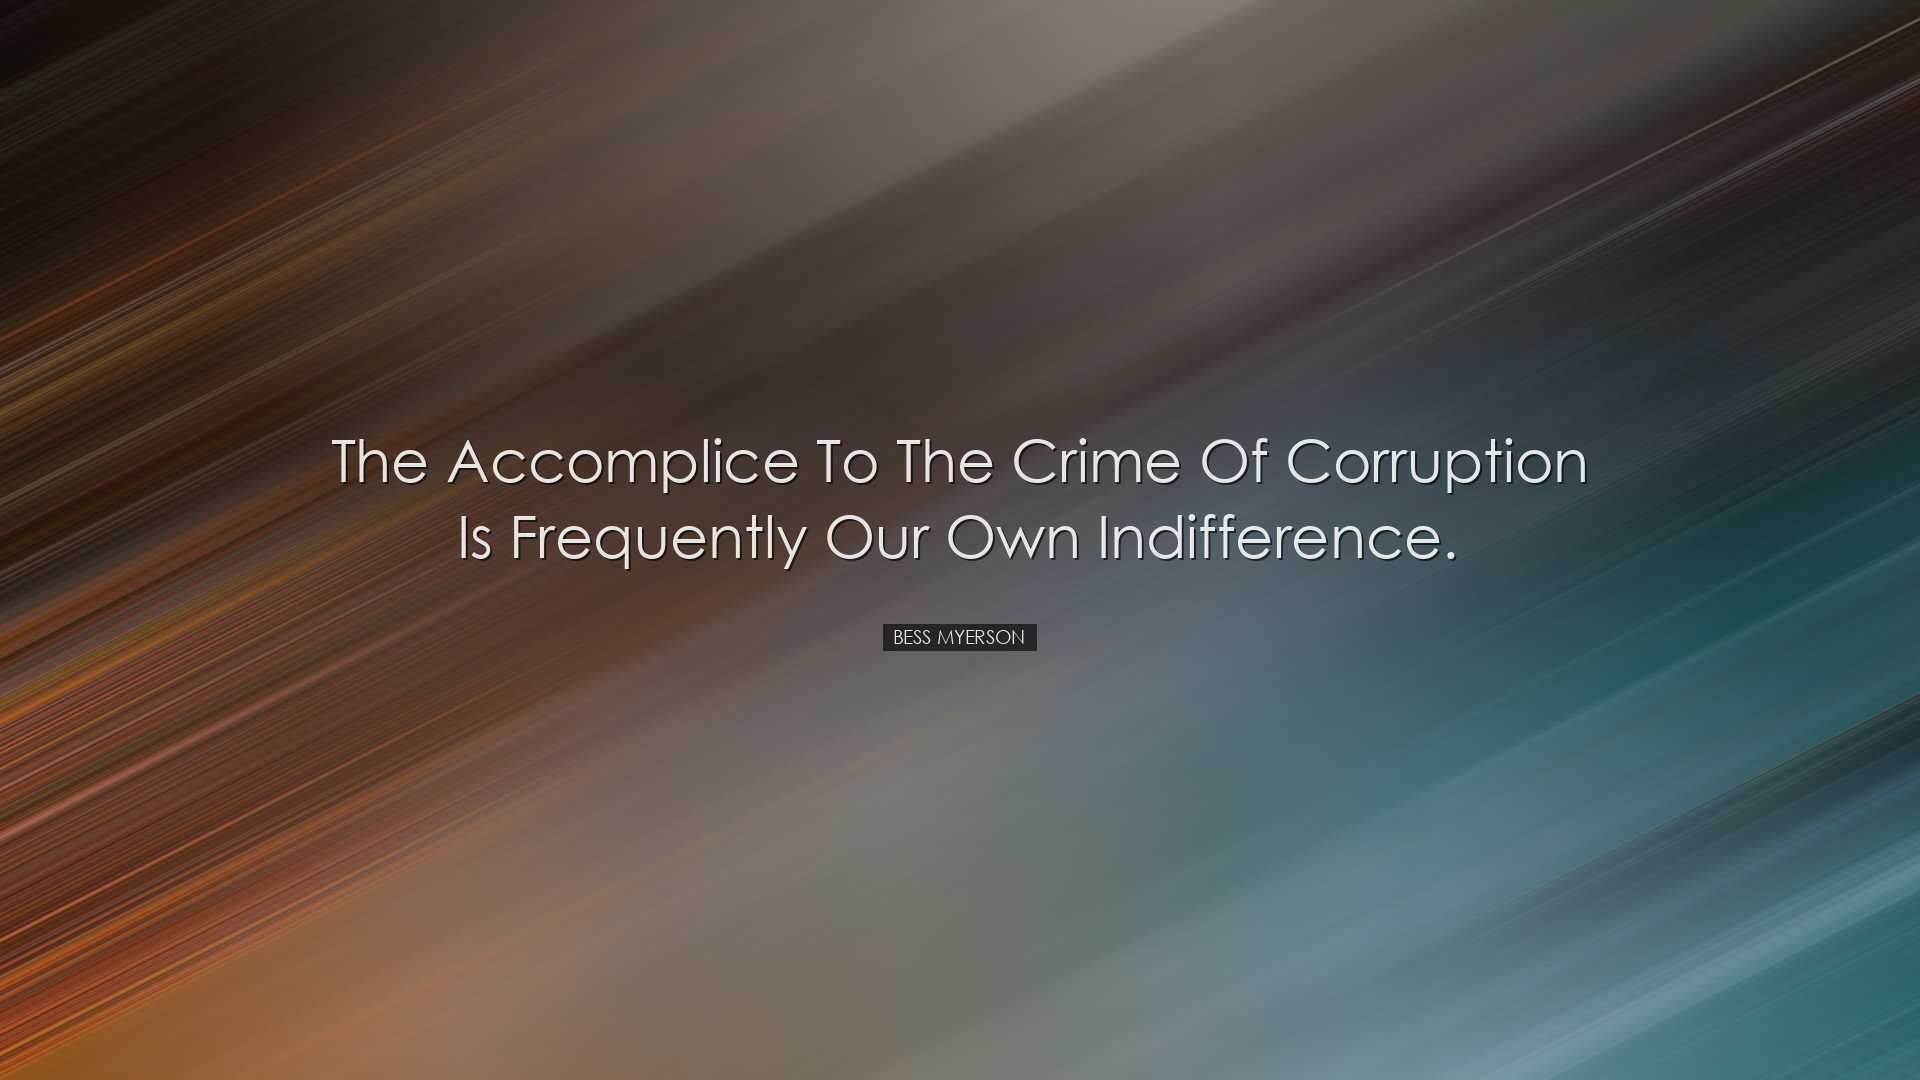 The accomplice to the crime of corruption is frequently our own in